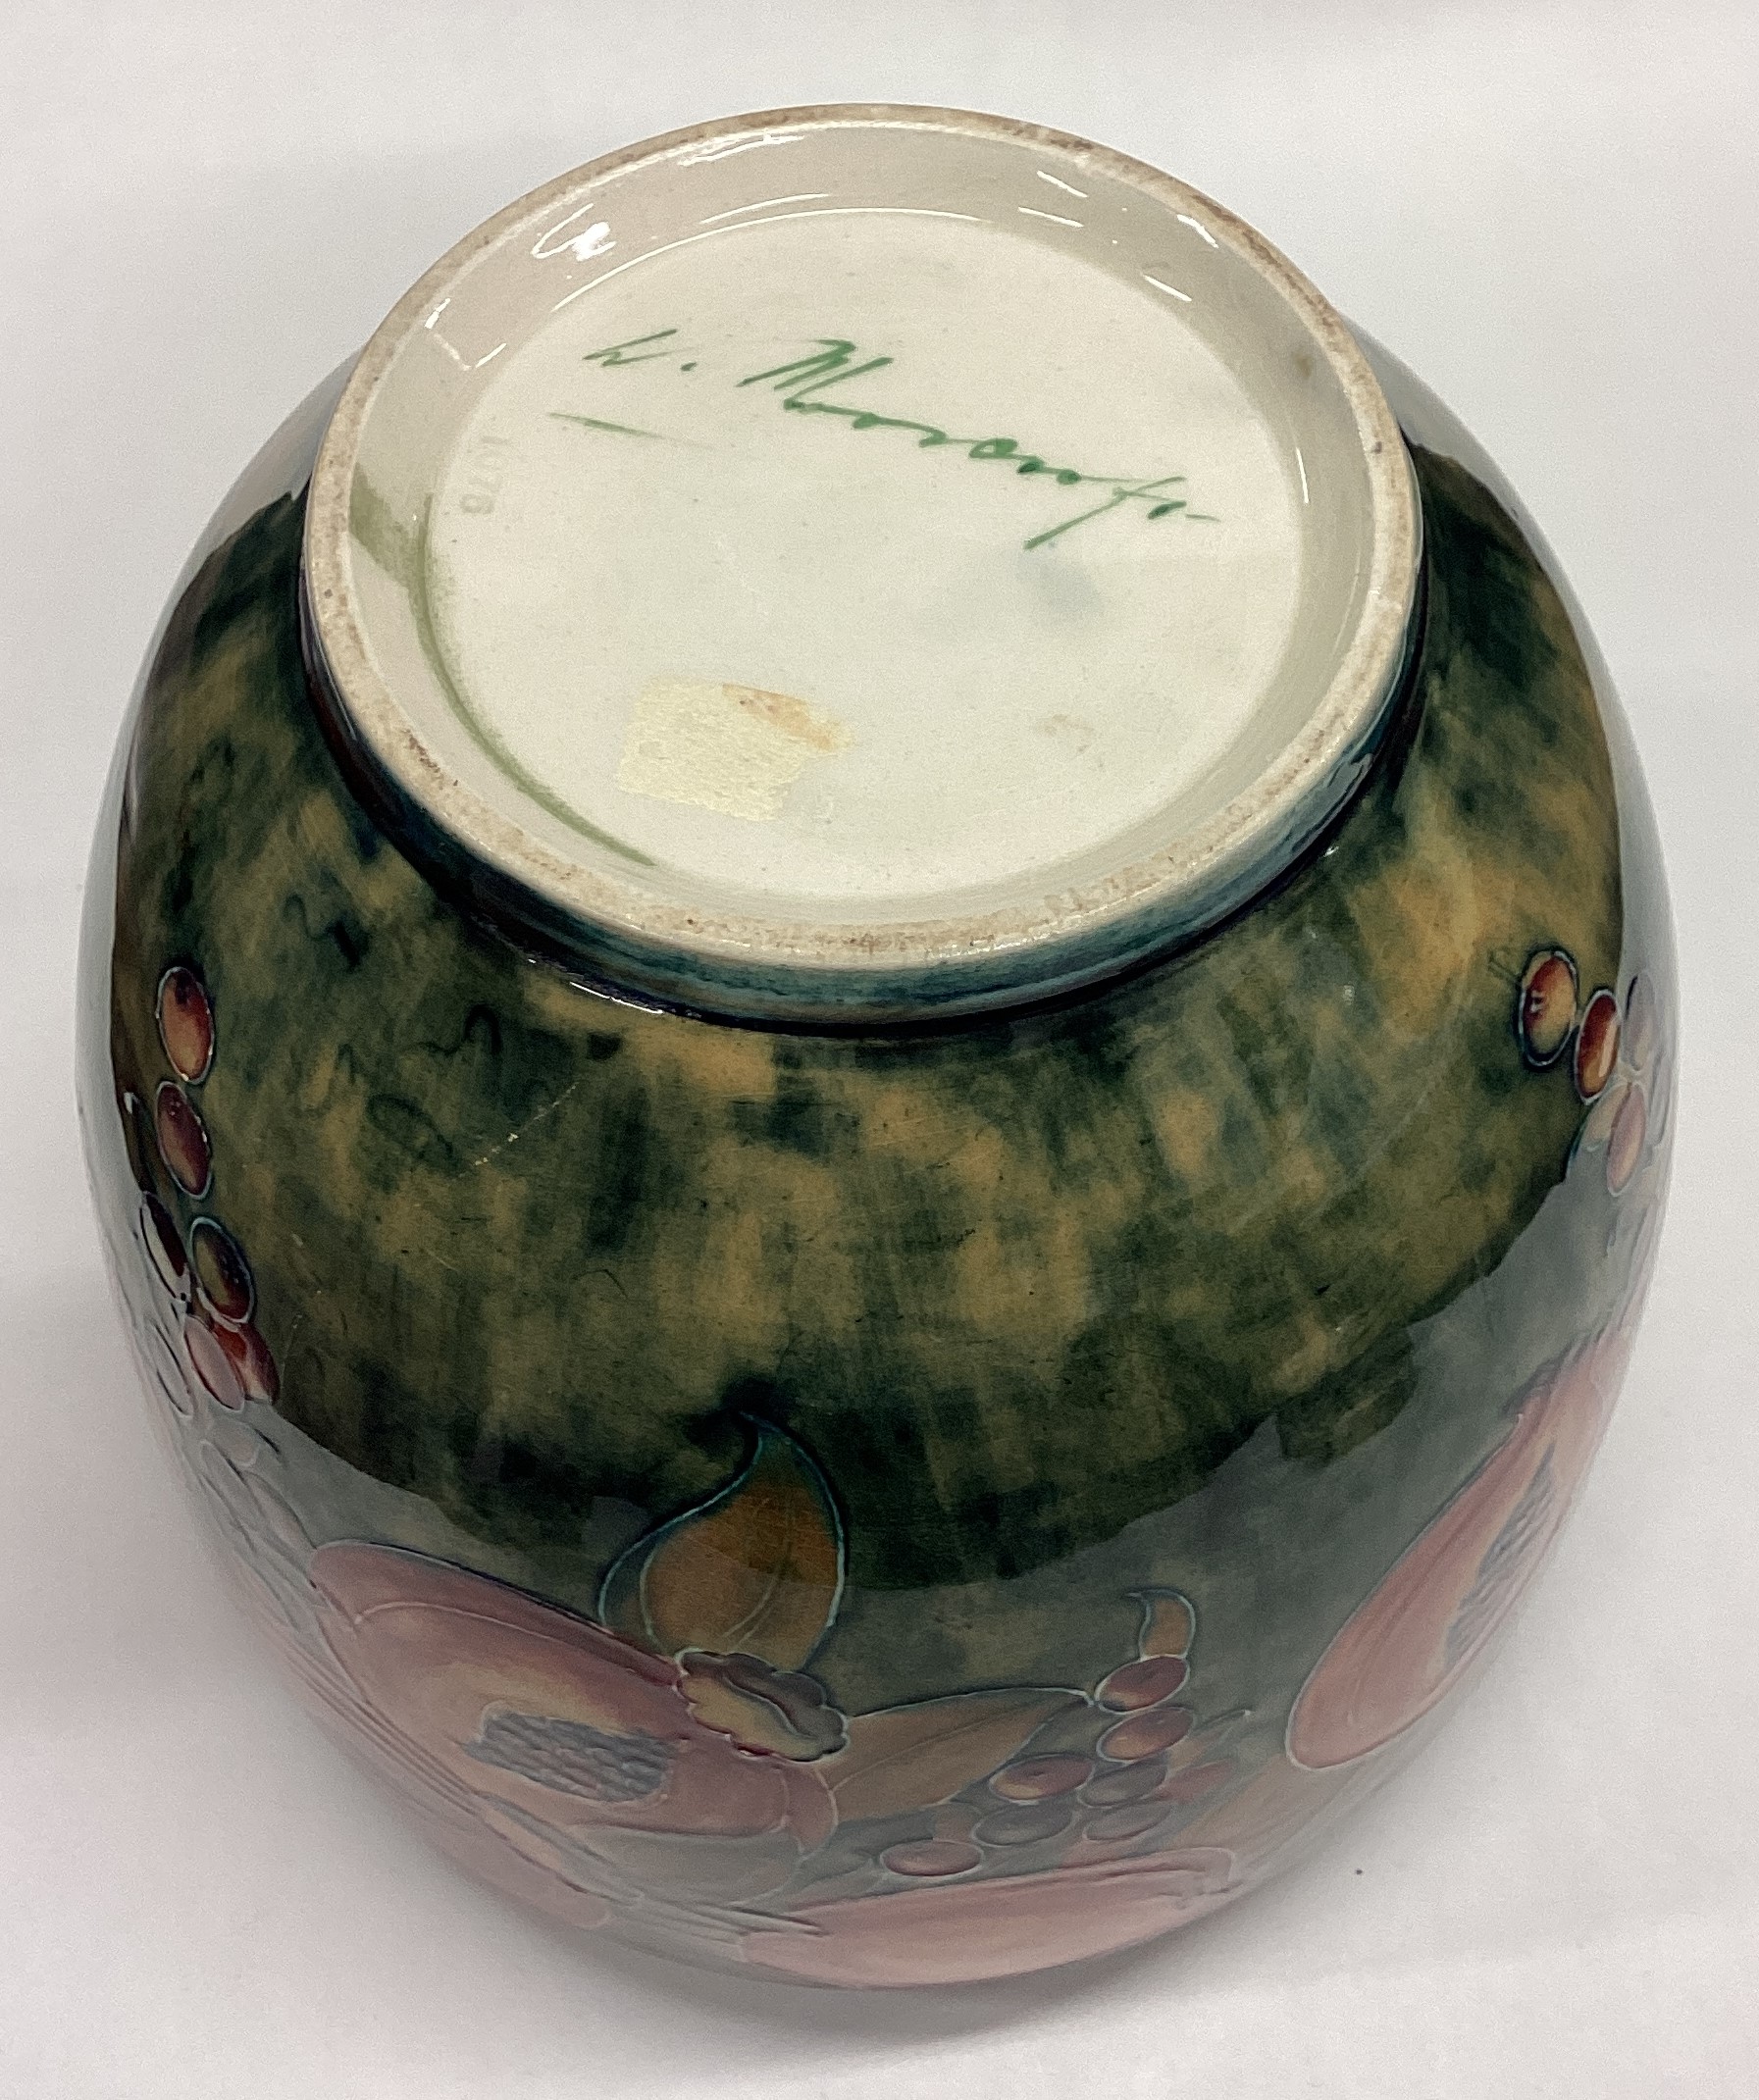 WILLIAM MOORCROFT: An early "Pomegranate" bowl on mottled green ground. - Image 4 of 8